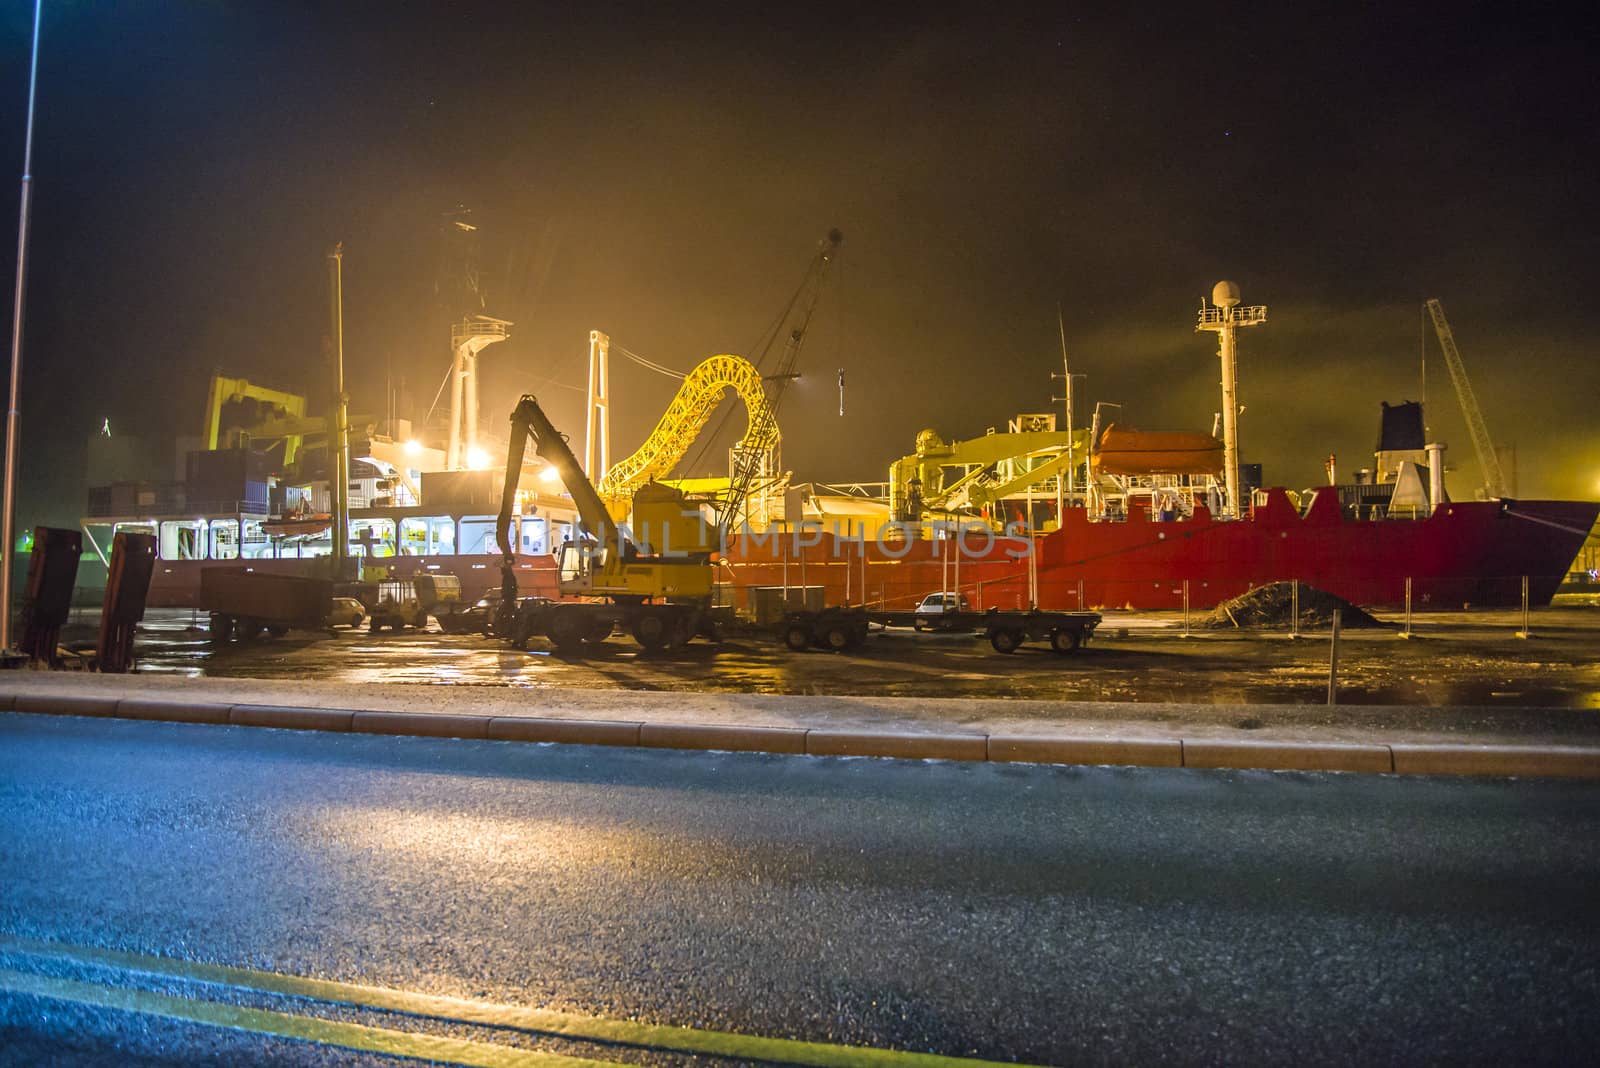 the picture is shot in january 2013 in the evening and shows mv nexans skagerrak which is currently docked at Halden harbor for inspection, maintenance and repairs, the fog was quite tightly and the image got a mysterious touch